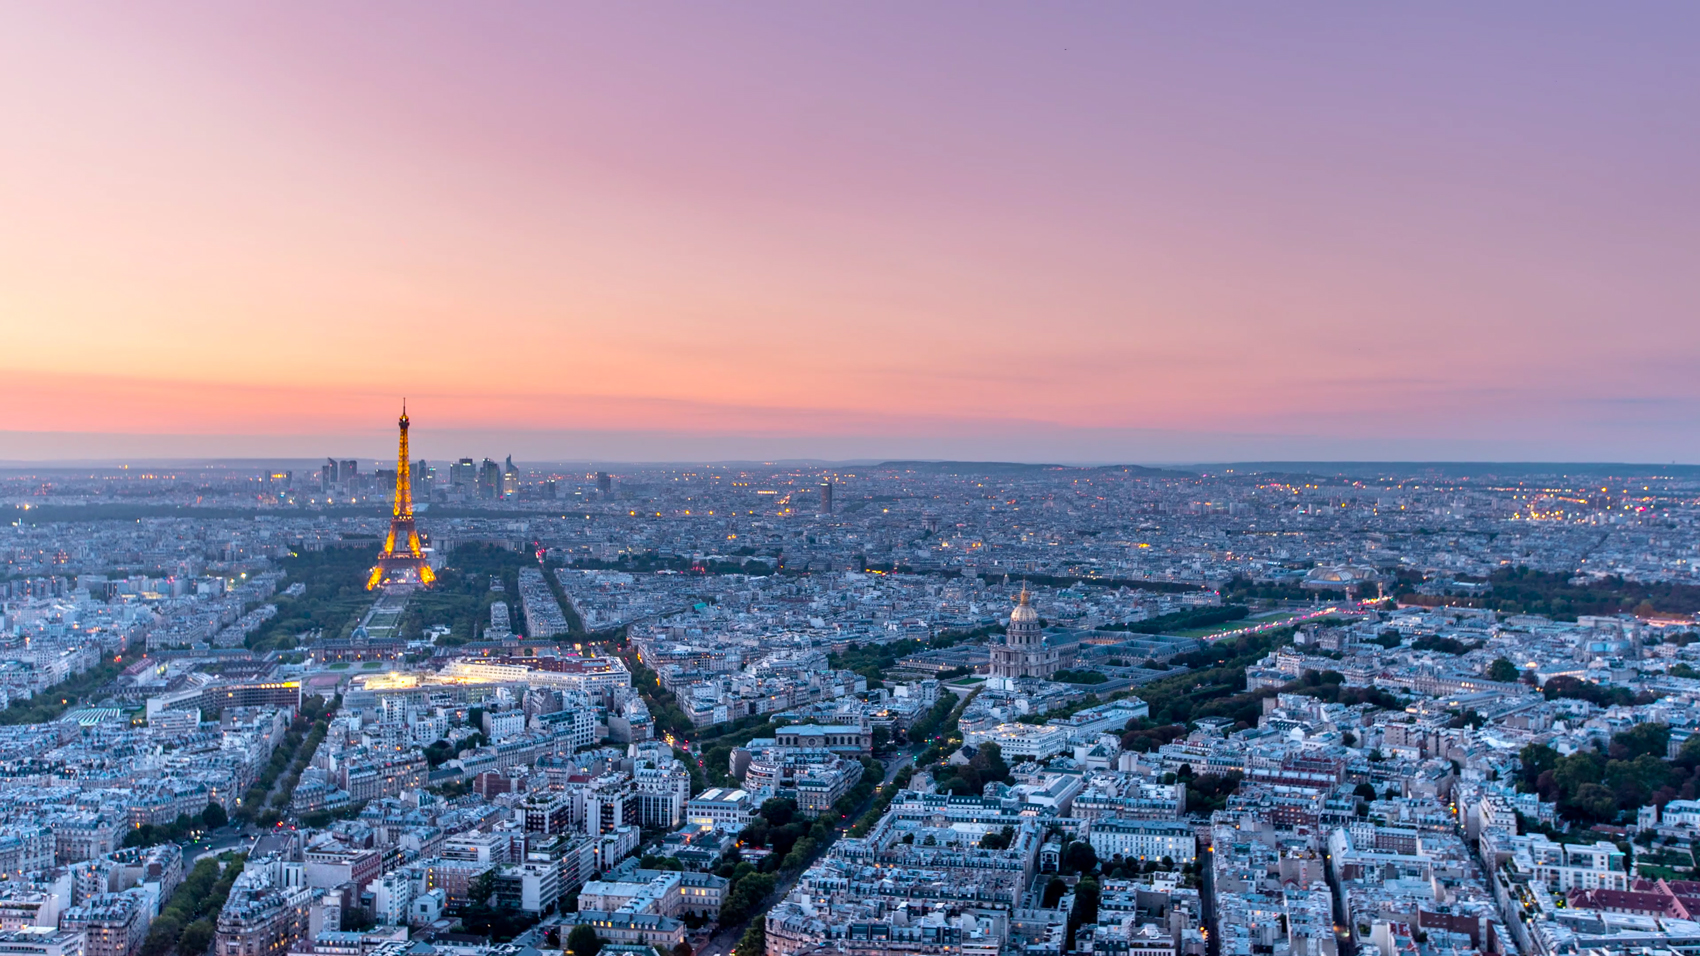 Hyper-lapse Film Takes Viewers On A Tour Through Lively And Vibrant Paris